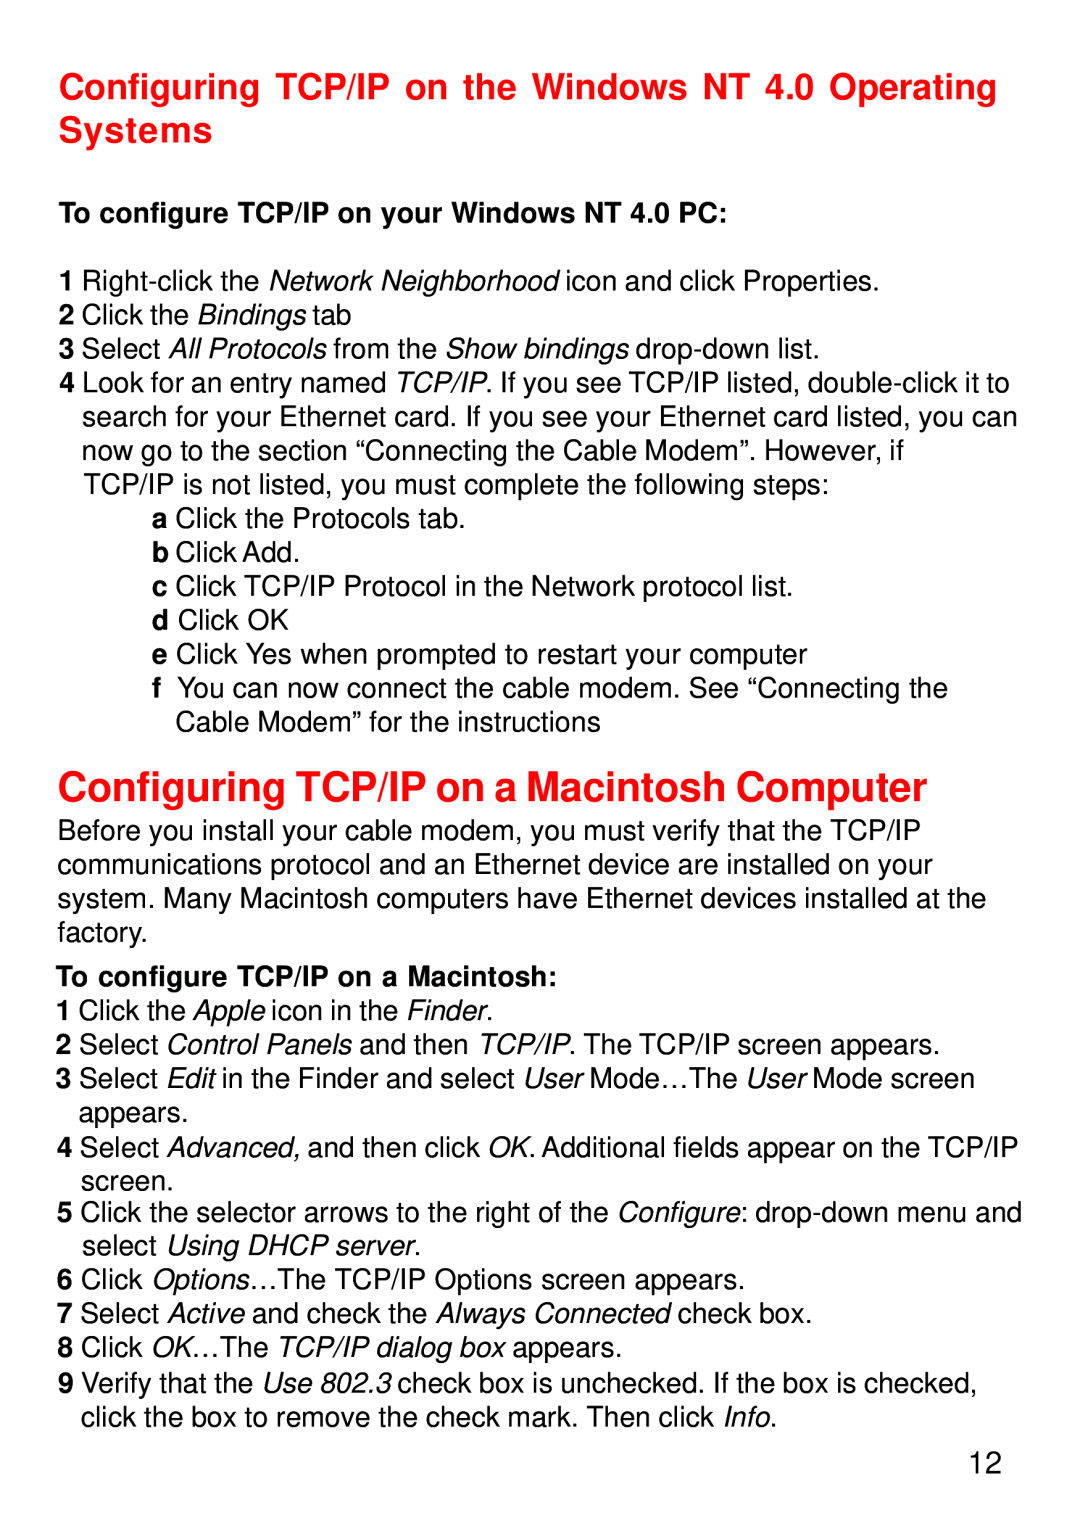 D-Link DCM-202 Configuring TCP/IP on a Macintosh Computer, Configuring TCP/IP on the Windows NT 4.0 Operating Systems 